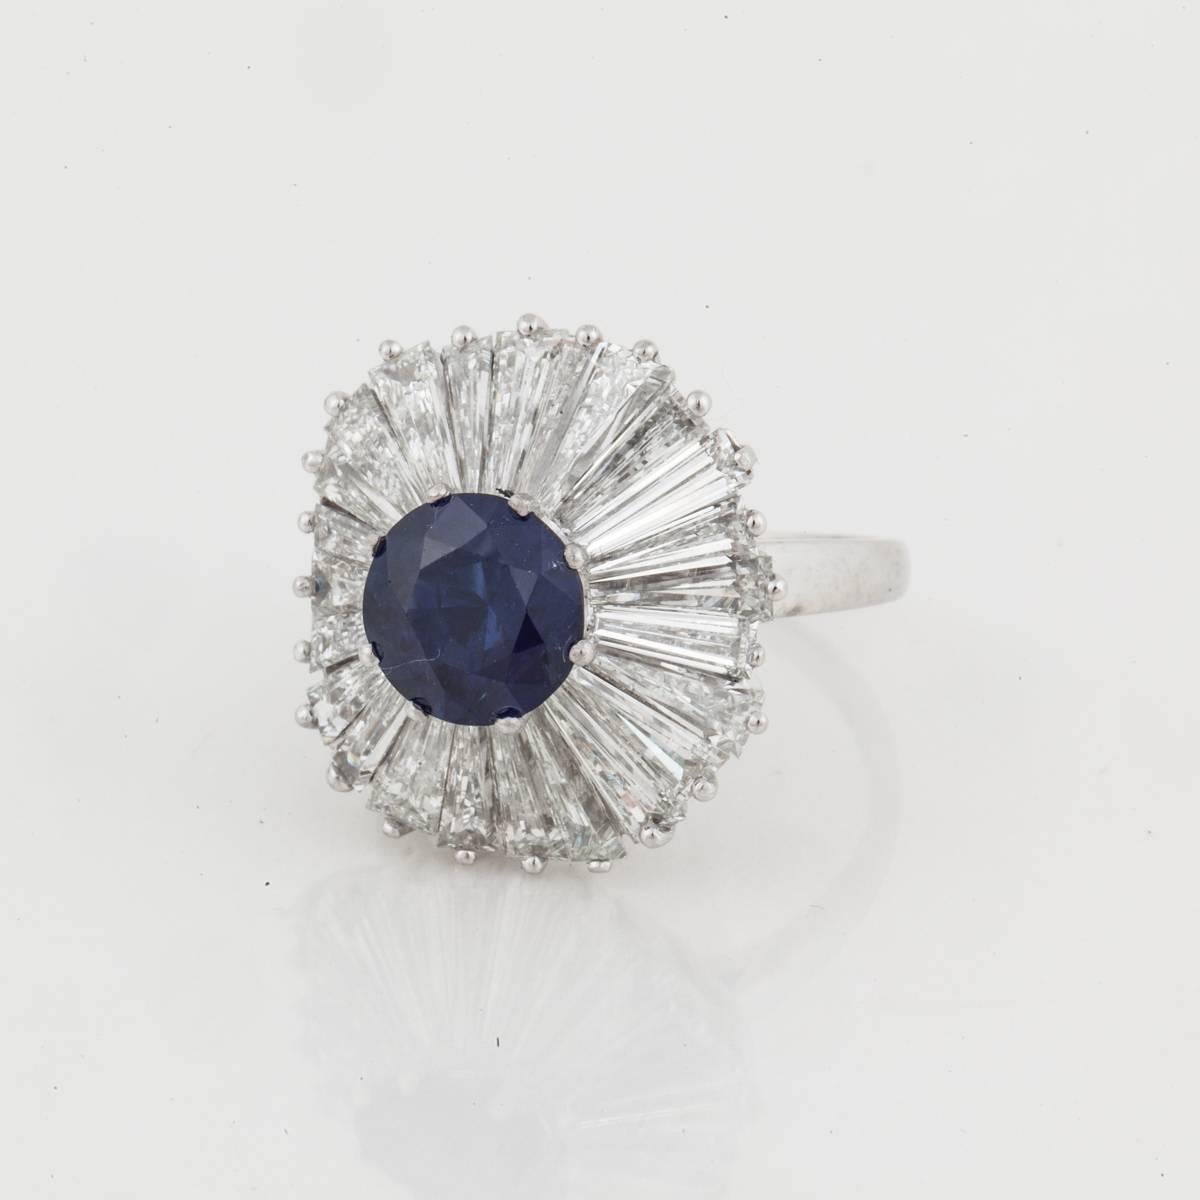 Platinum ballerina ring featuring a 2.47 carat blue sapphire and baguette-cut diamonds.  The sapphire is accompanied by an AGL report, stating Burma, no heat.  The diamonds total 10 carats, F-G color, and VVS-VS clarity.  The ring is a size 7 and